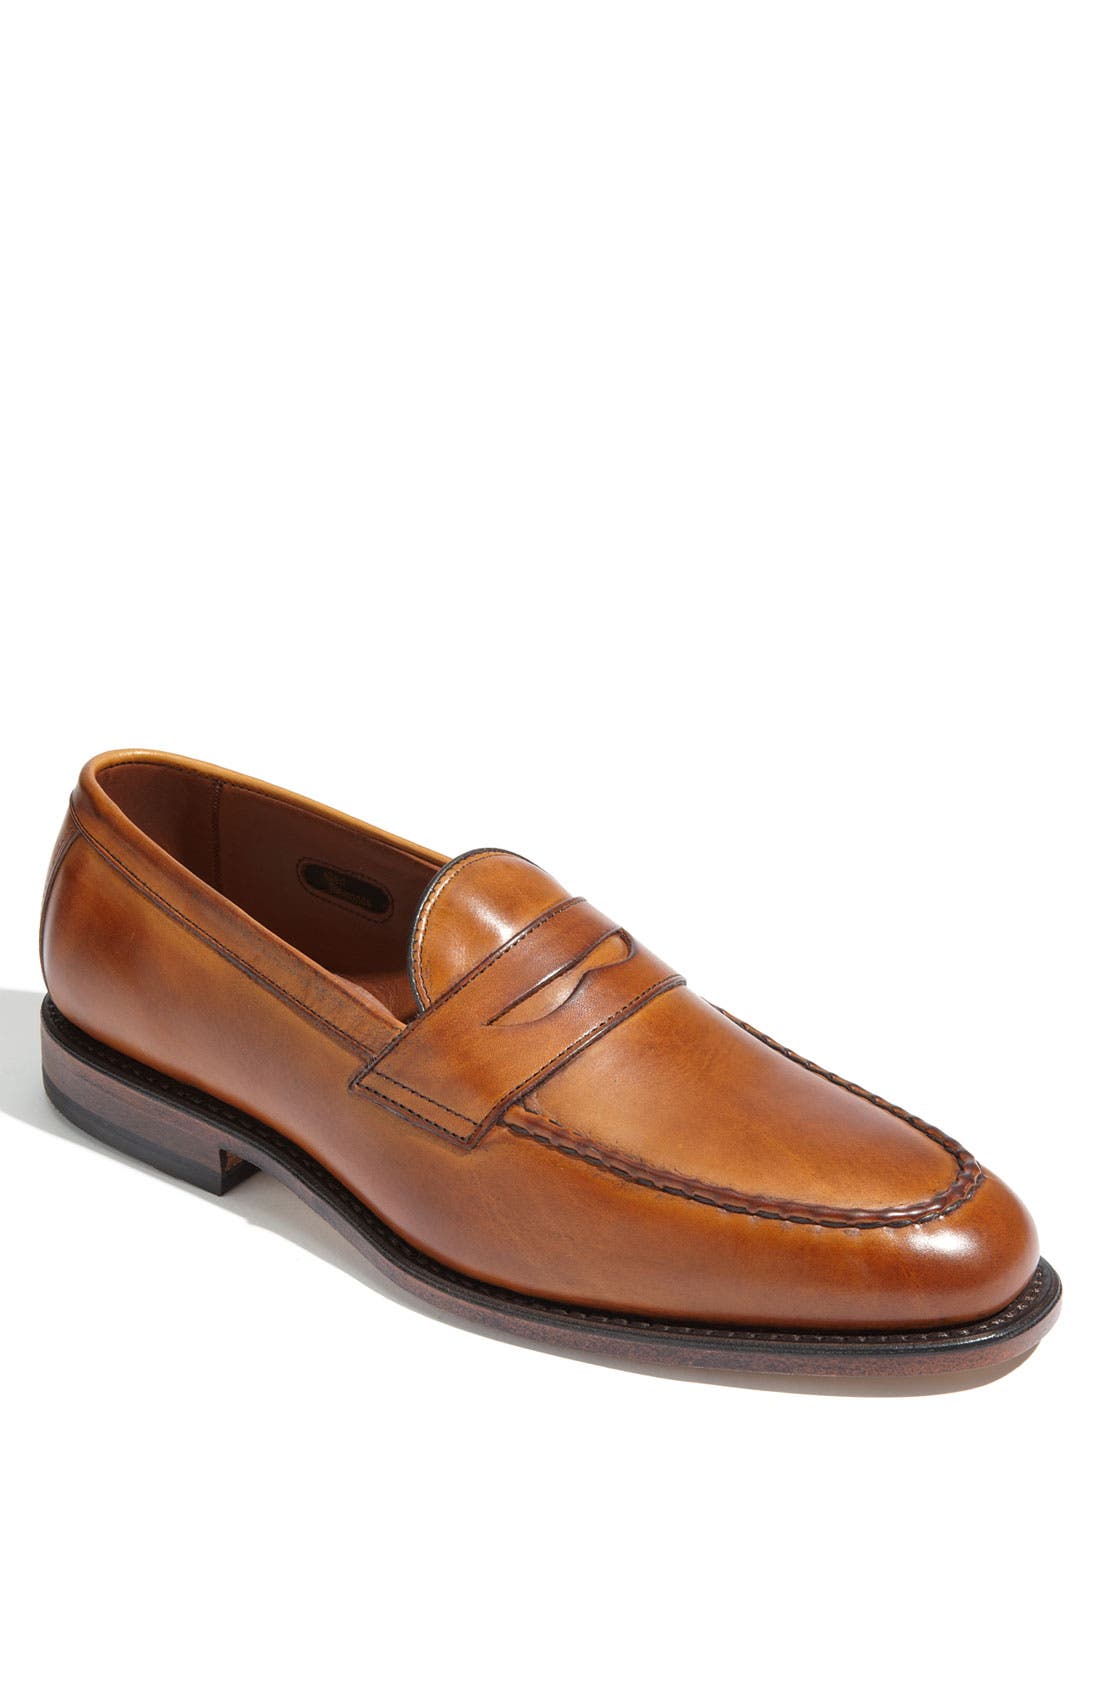 mcgraw penny loafer